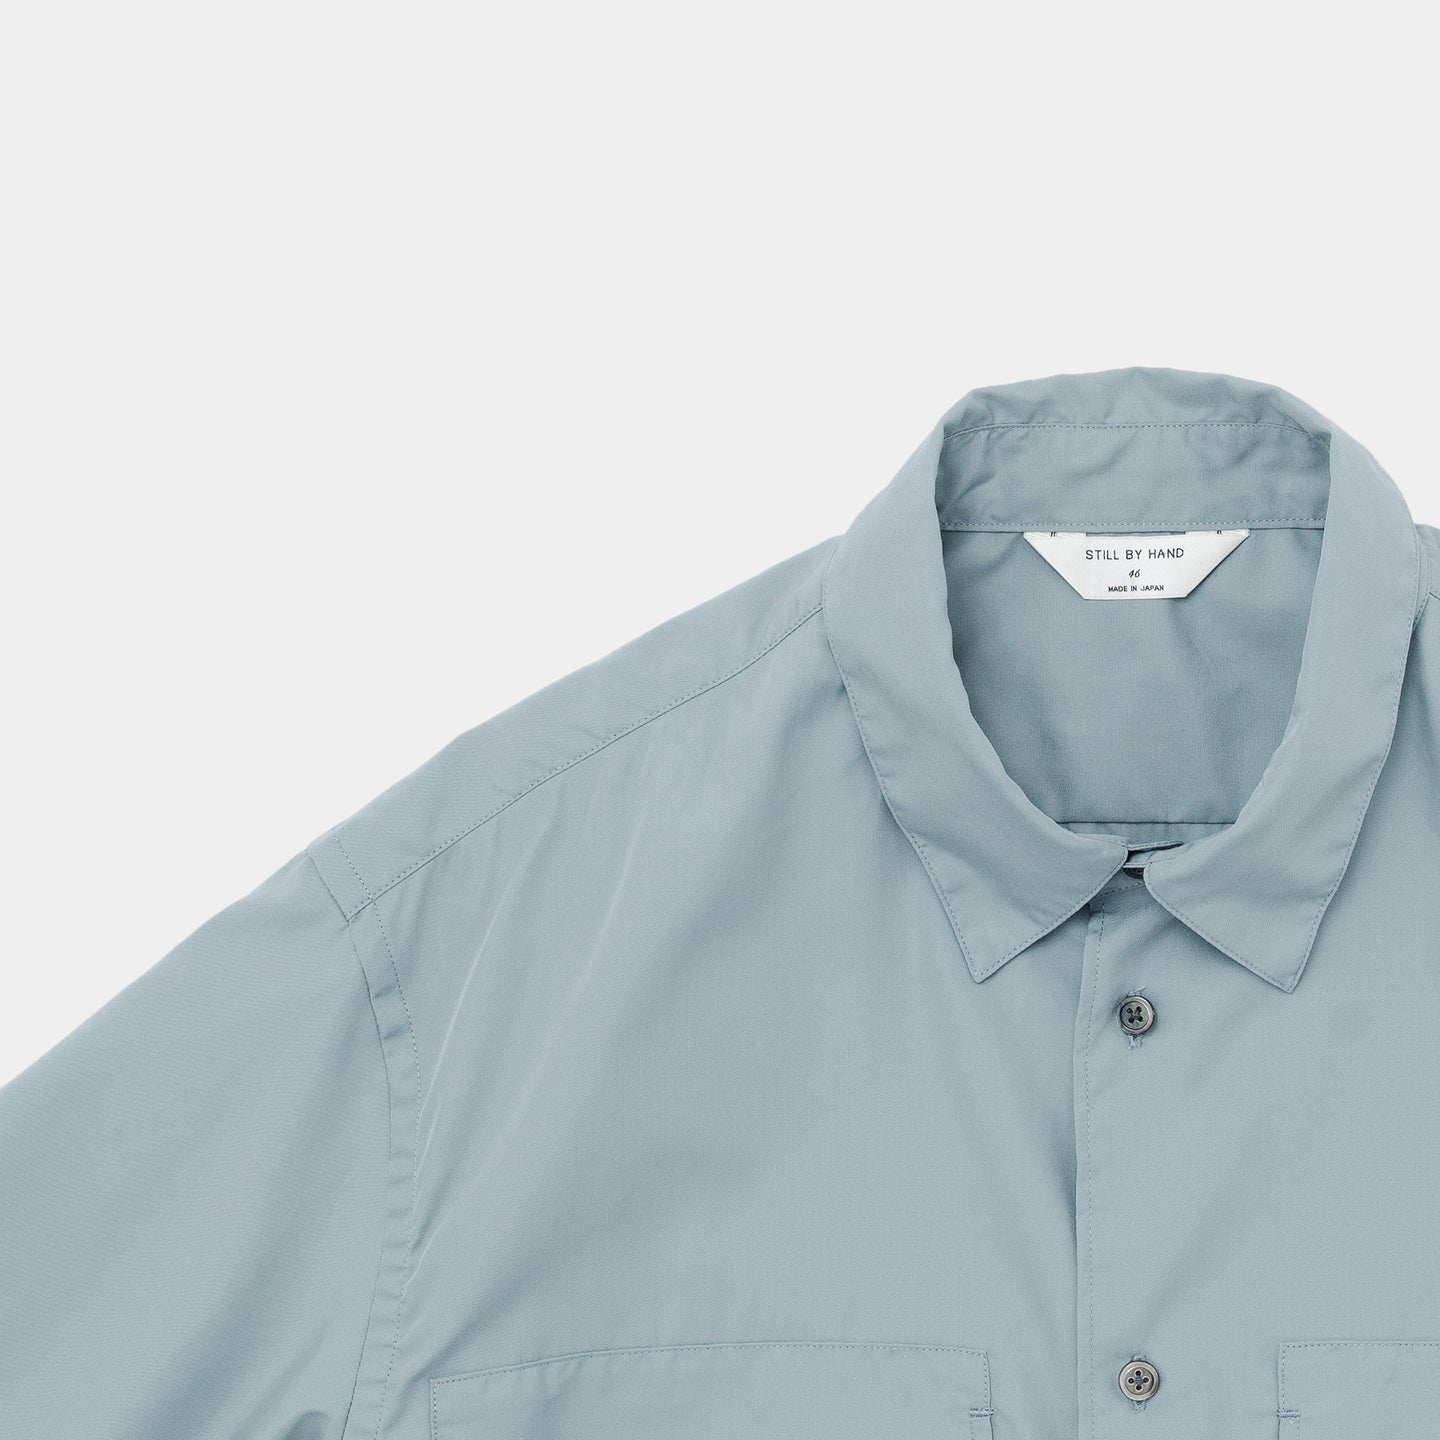 STILL BY HAND Double Pocket Shirt LEO BOUTIQUE